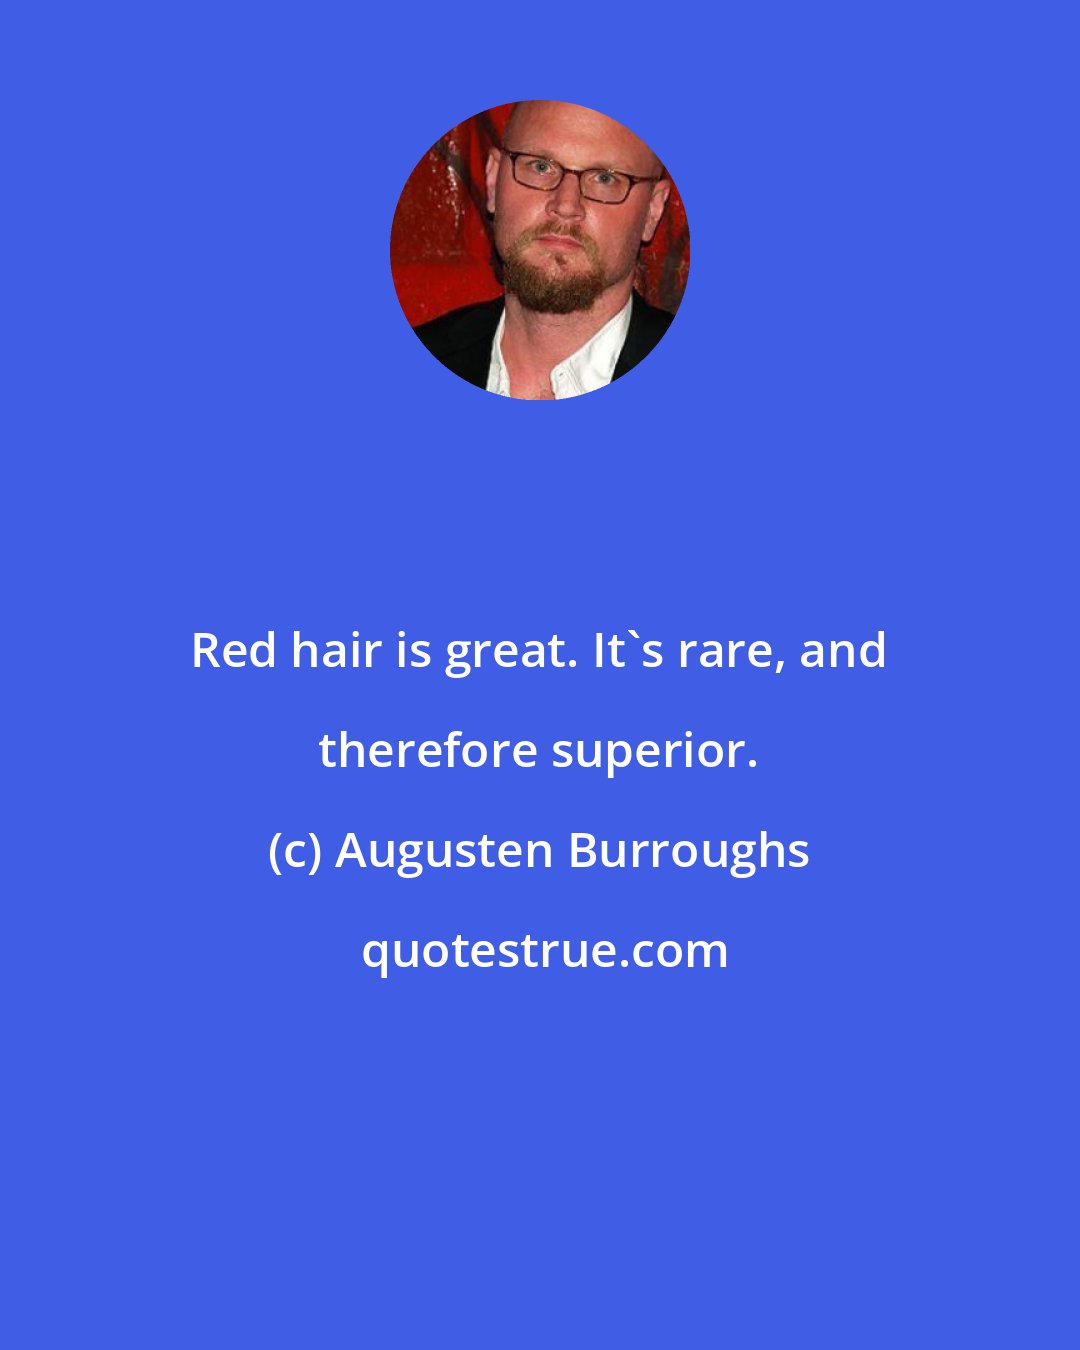 Augusten Burroughs: Red hair is great. It's rare, and therefore superior.